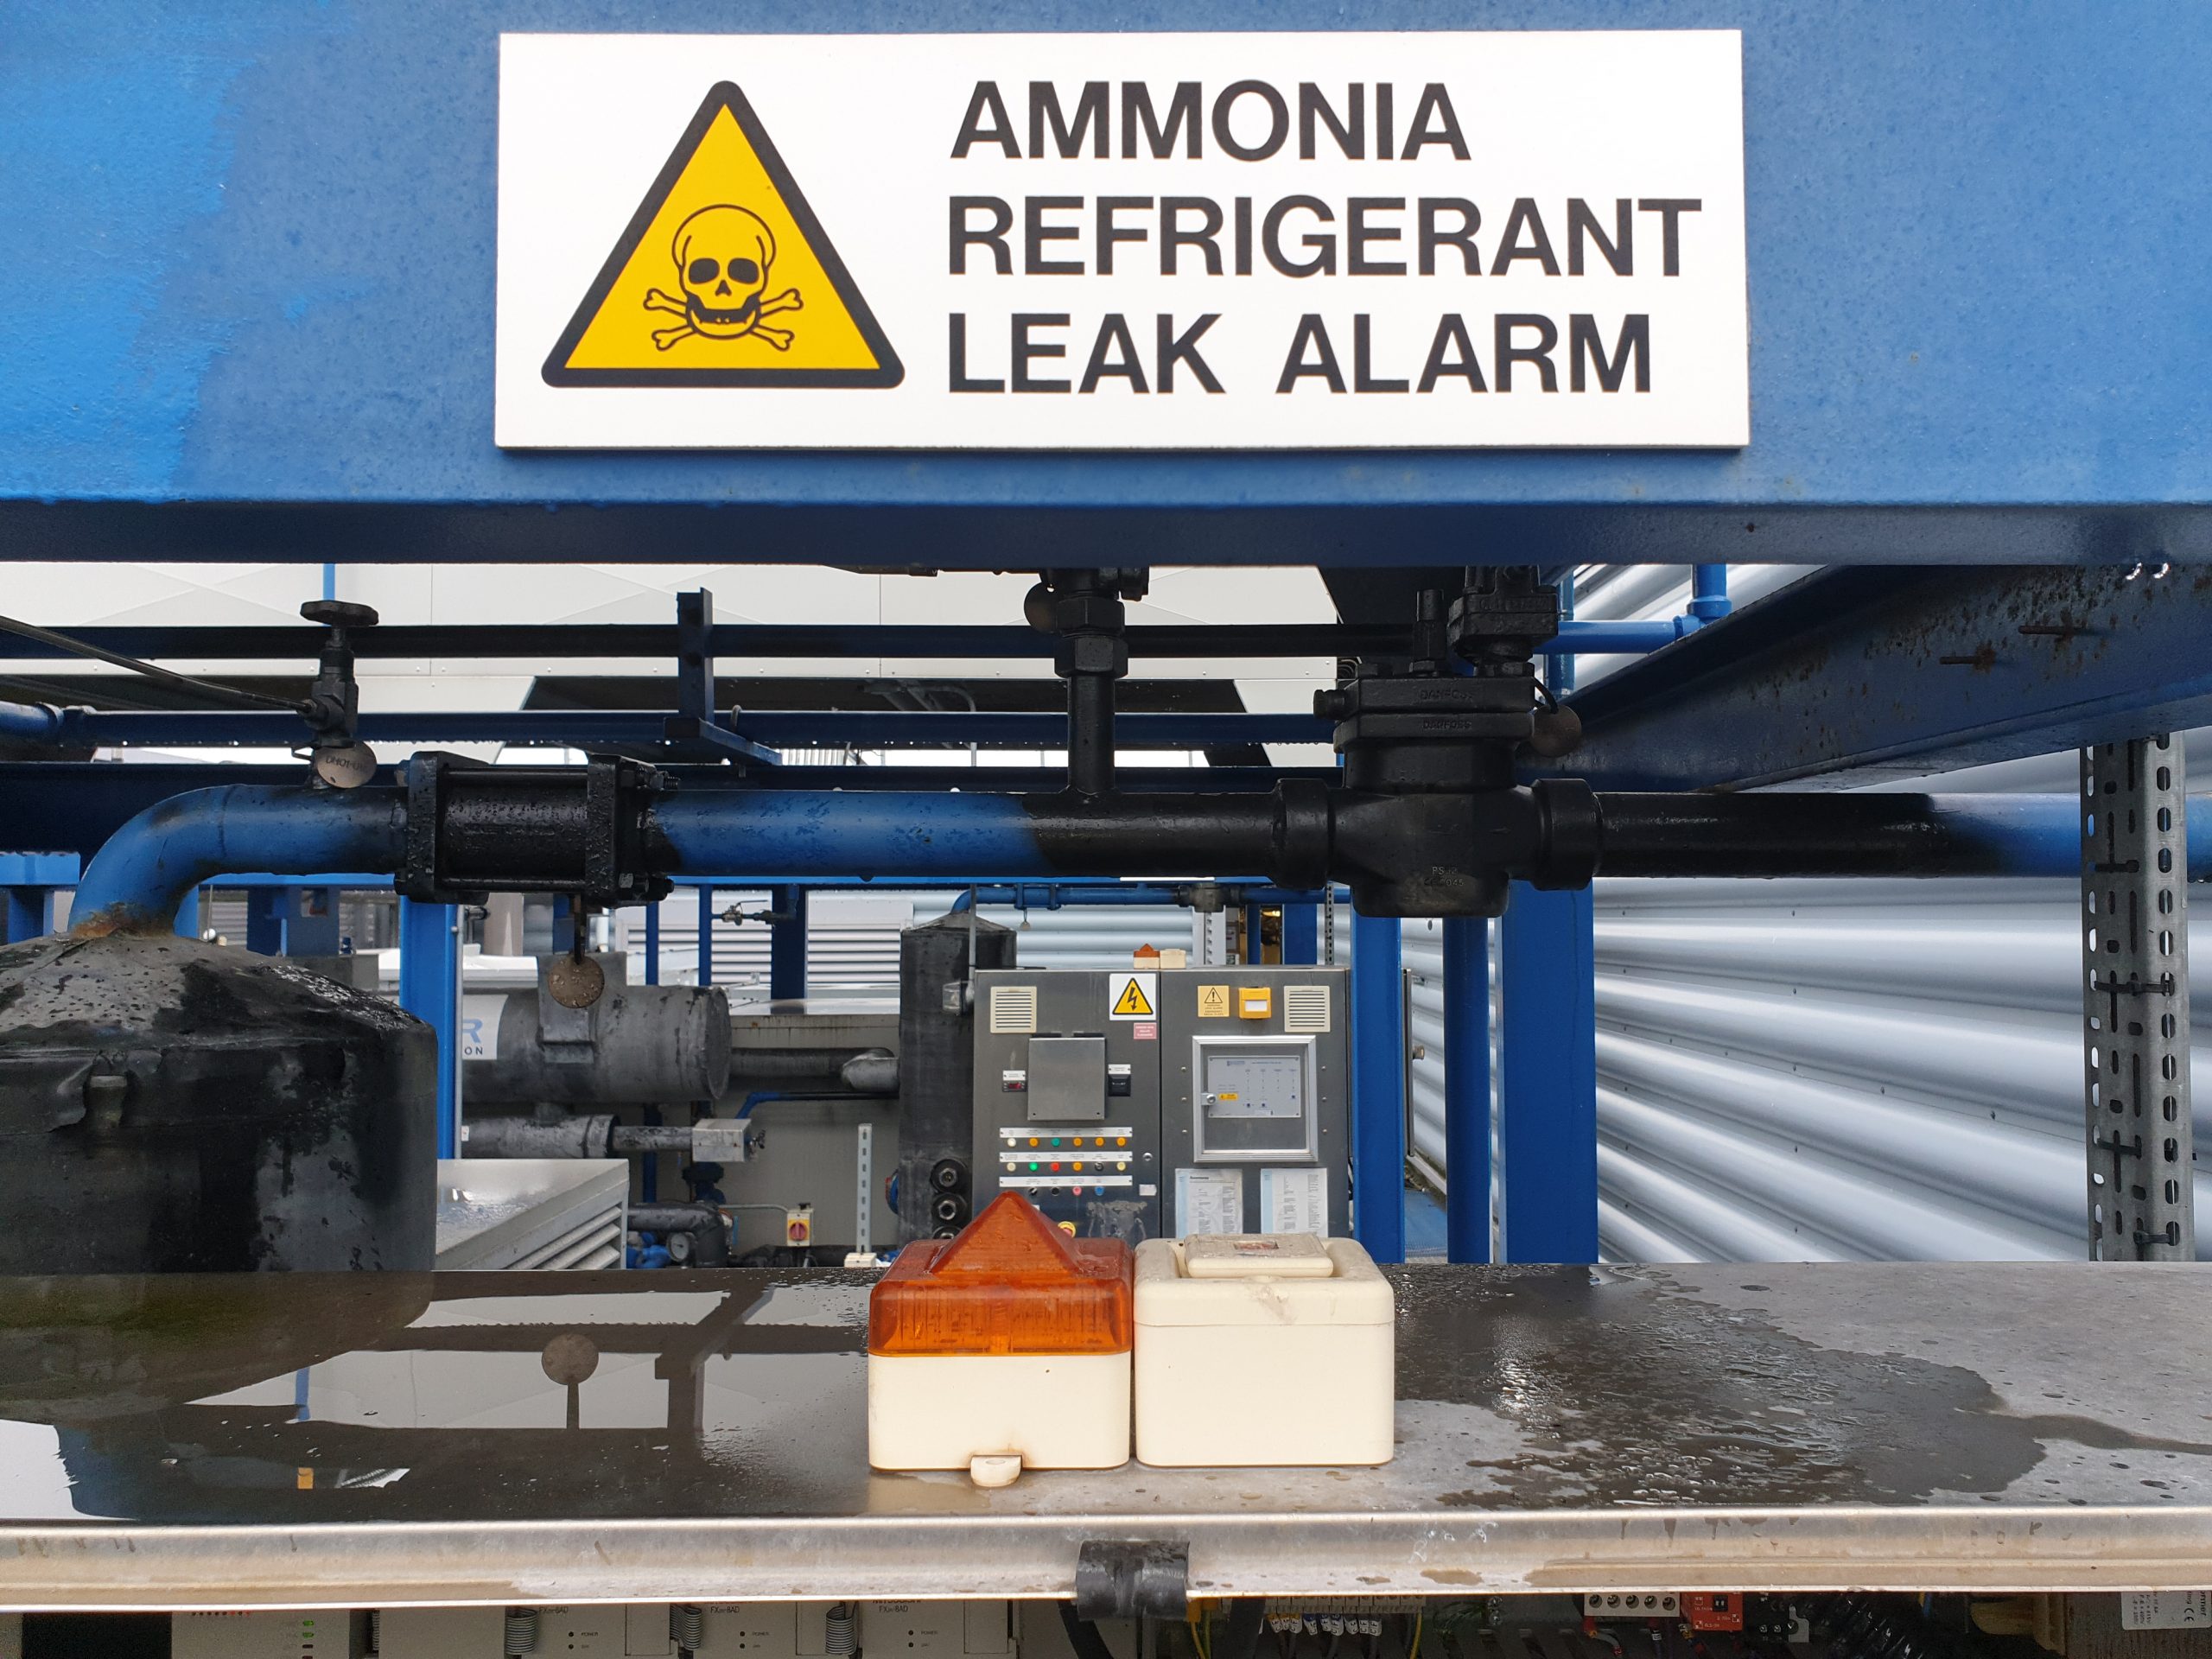 Ammonia warning sign and yellow light flashing during chiller call out